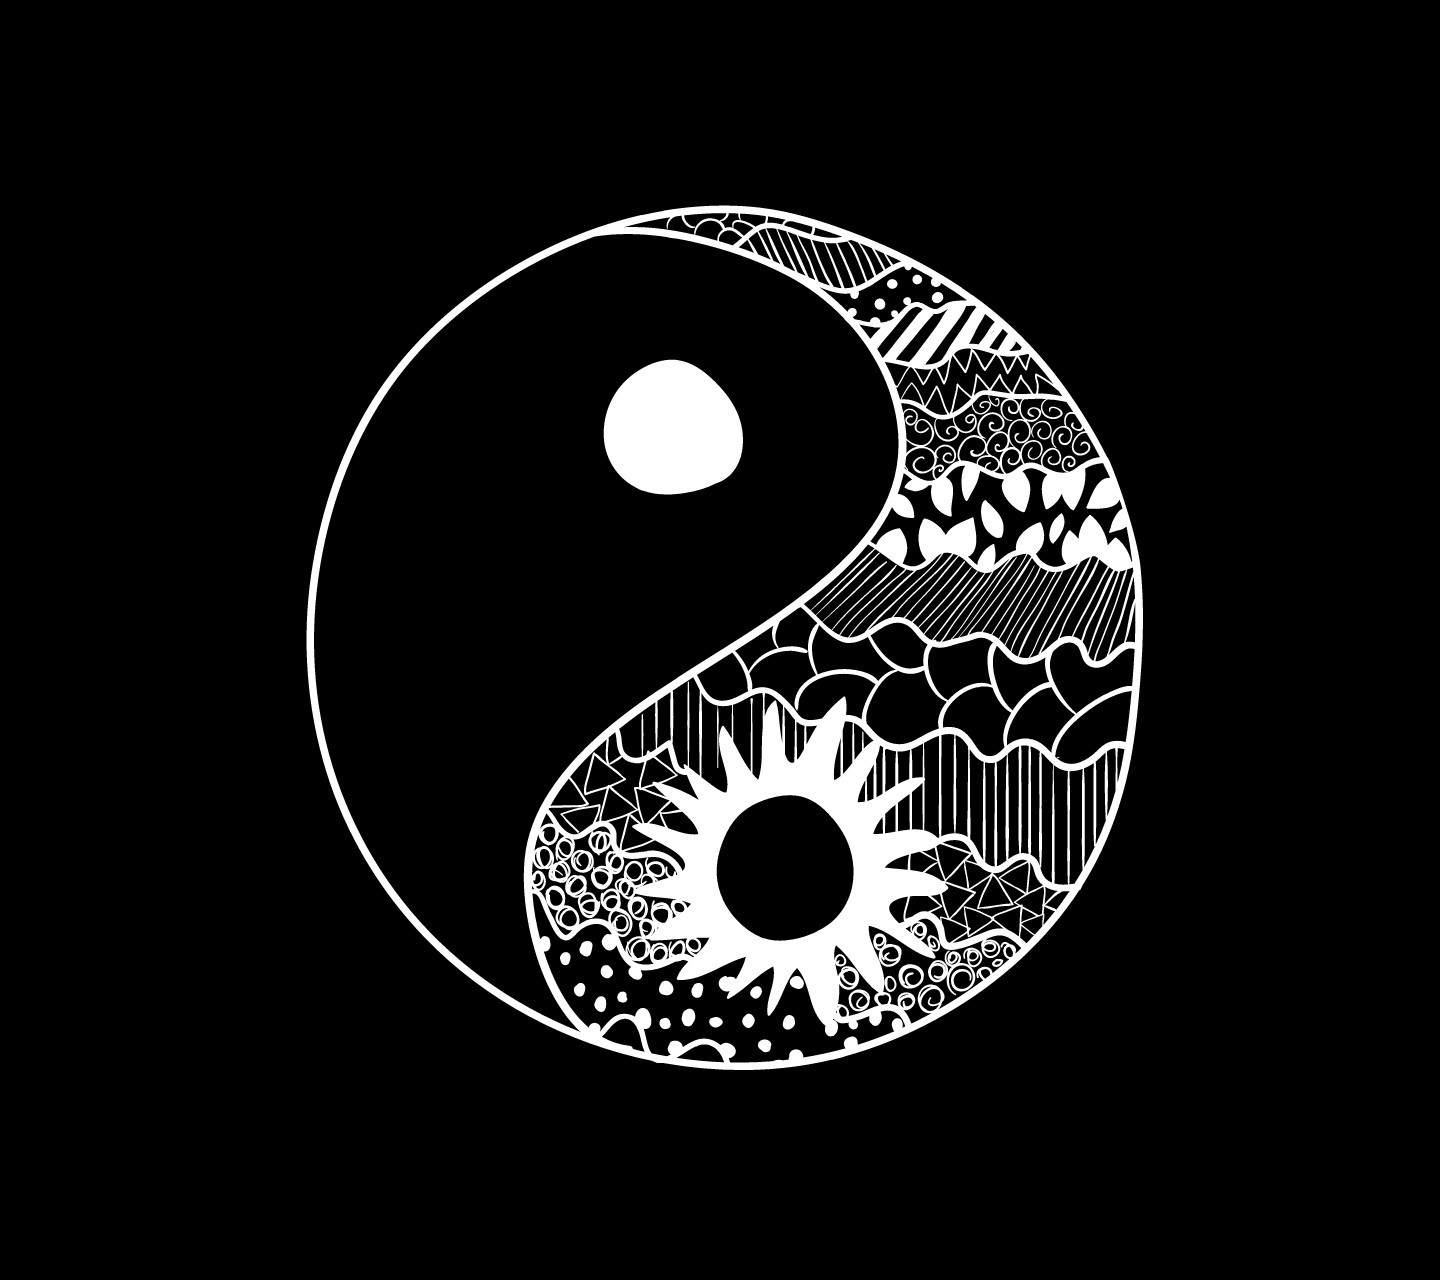 General 1440x1280 Yin and Yang monochrome symbols artwork simple background